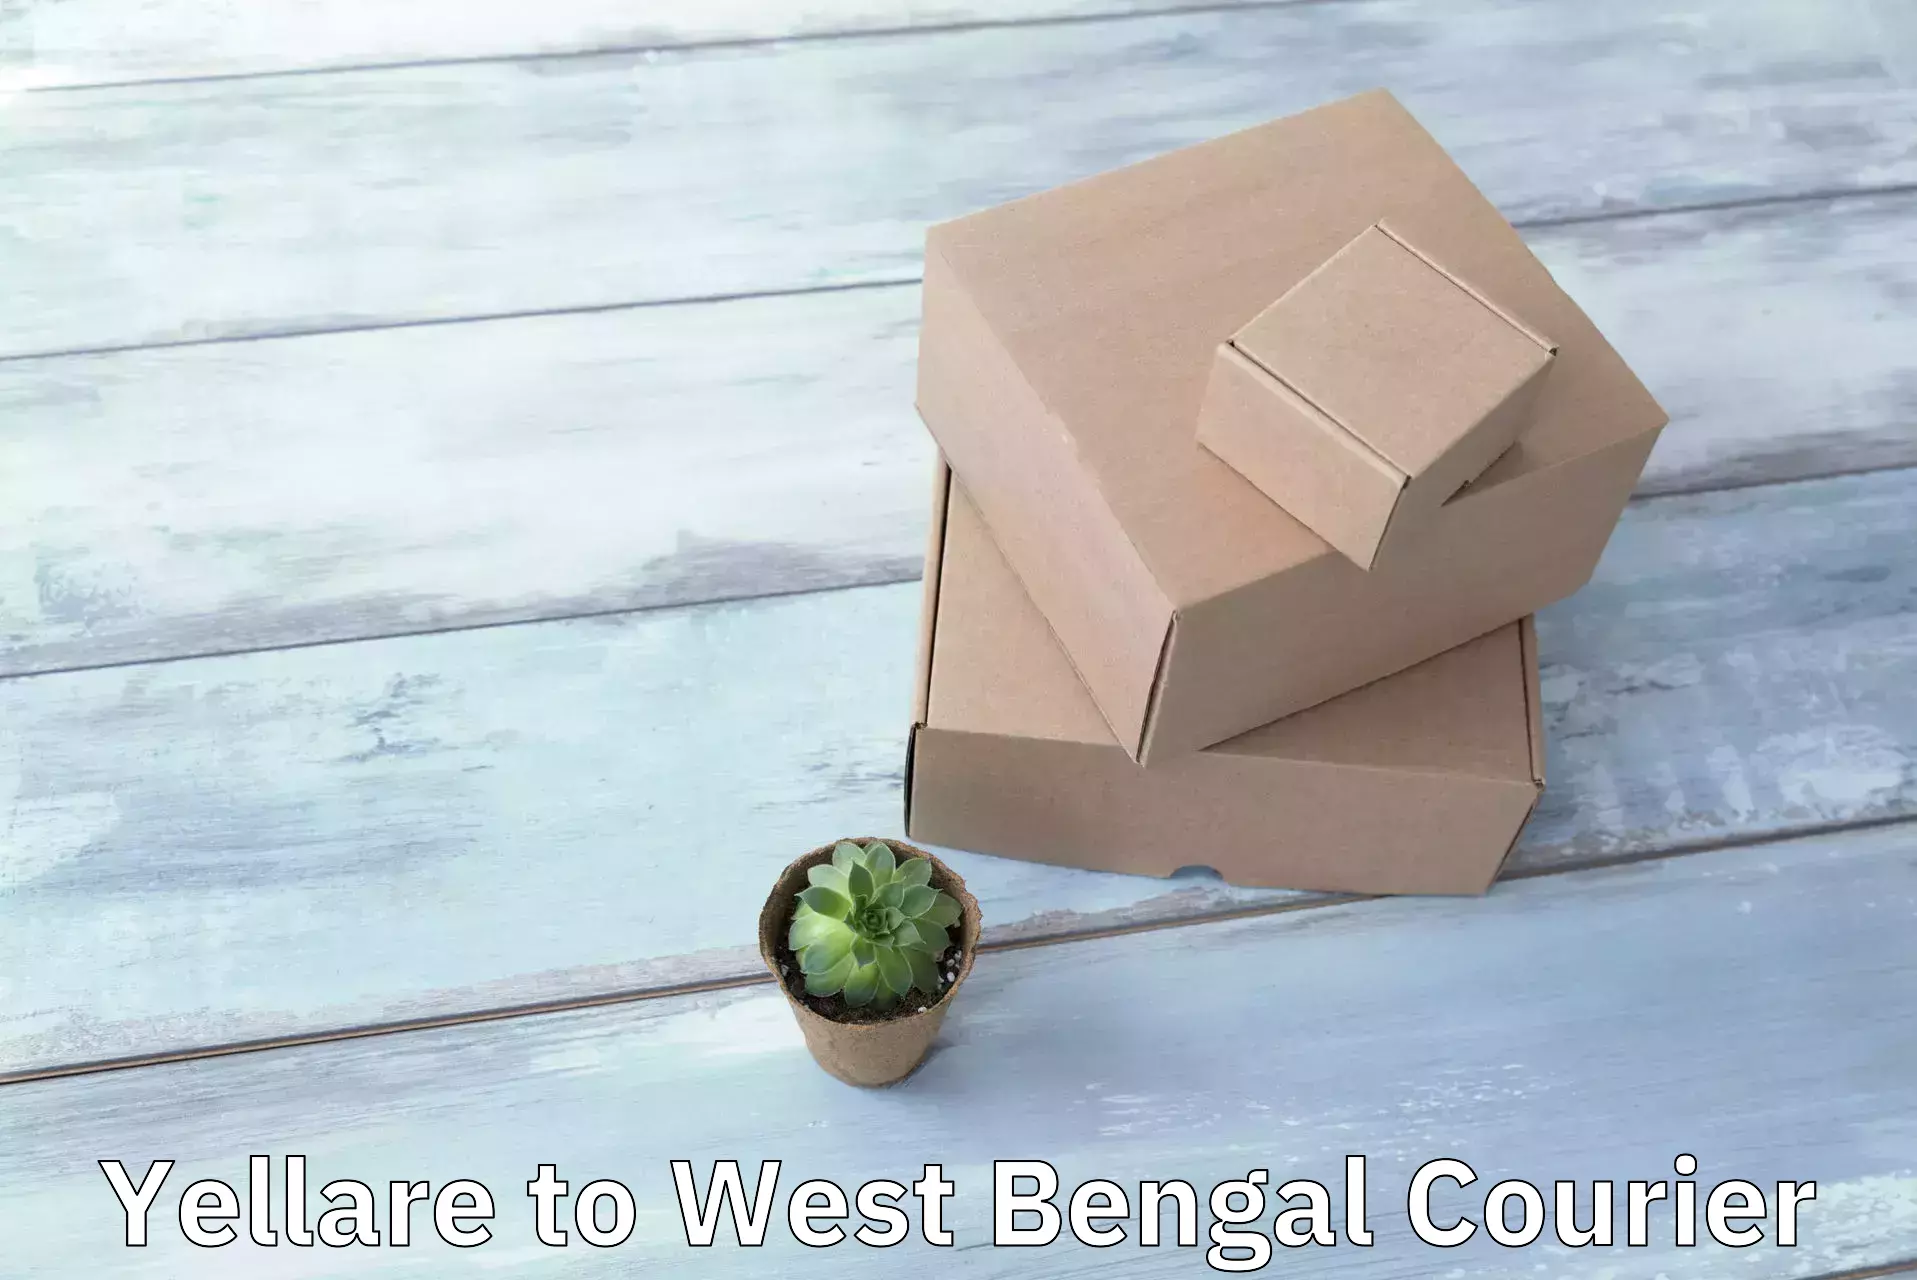 Courier service partnerships in Yellare to West Bengal